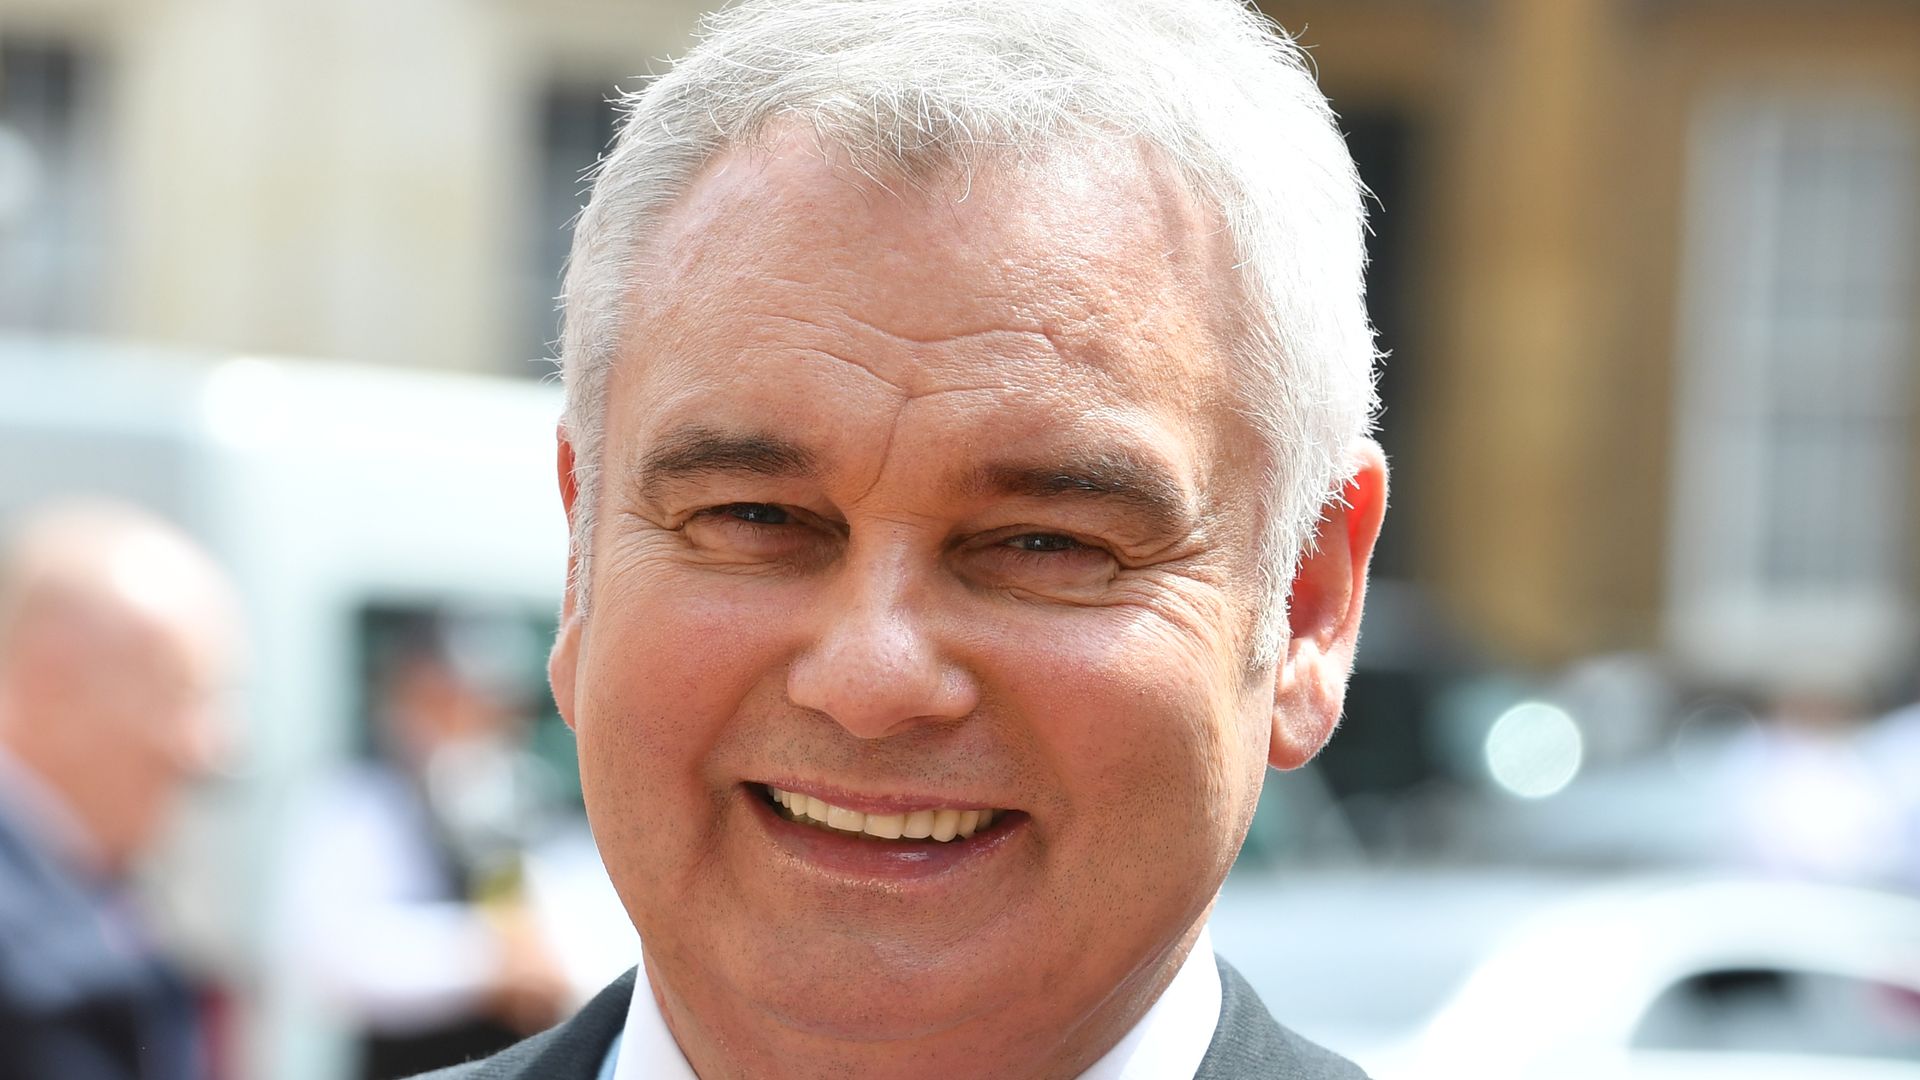 Eamonn Holmes melts hearts with ultra-rare photo of granddaughters Emilia and Isabella